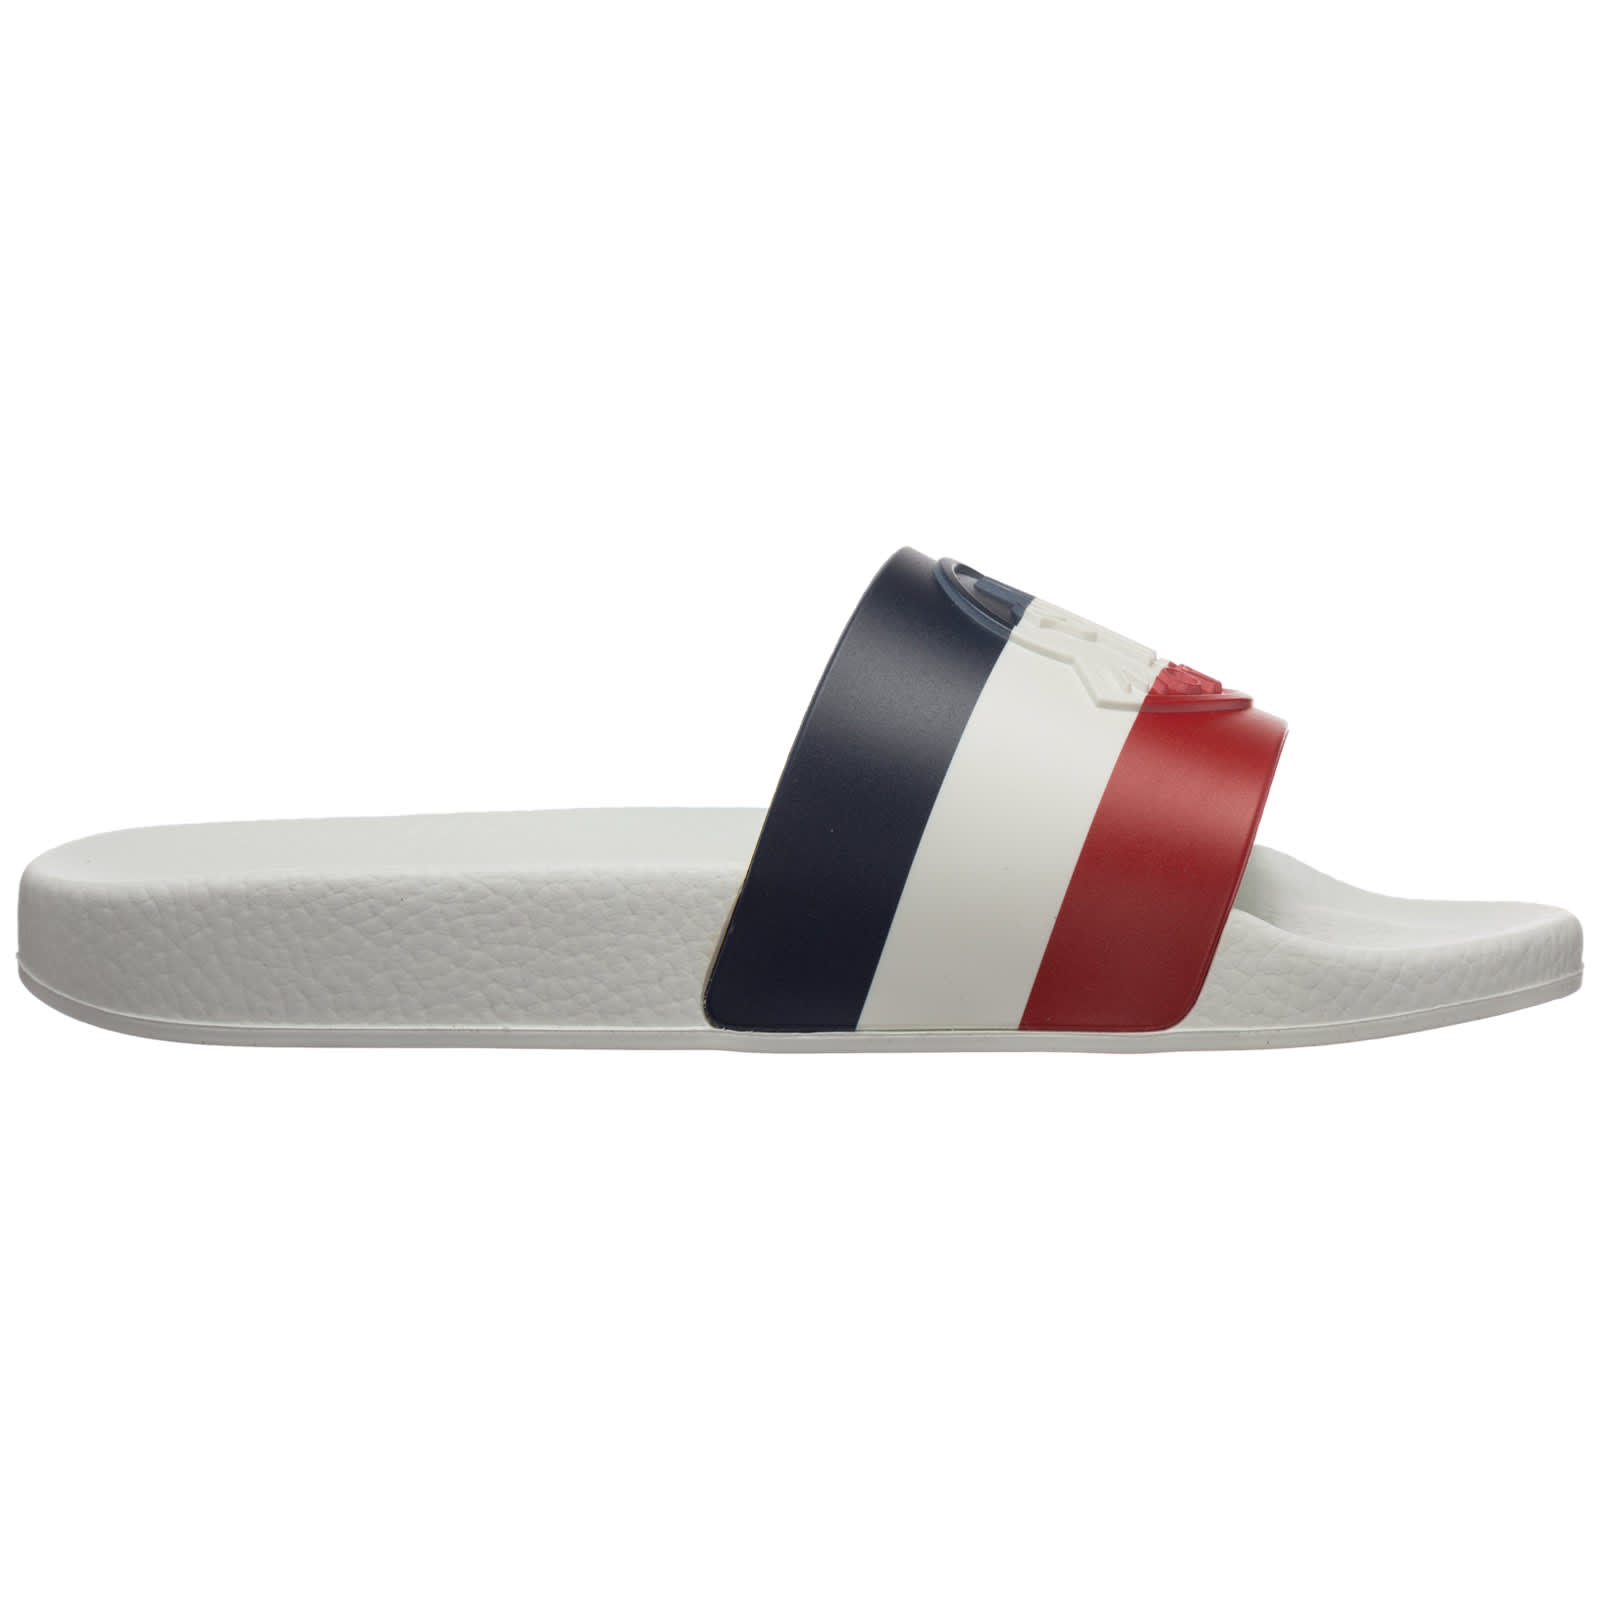 Buy Moncler Ventus 7 Slides online, shop Moncler shoes with free shipping